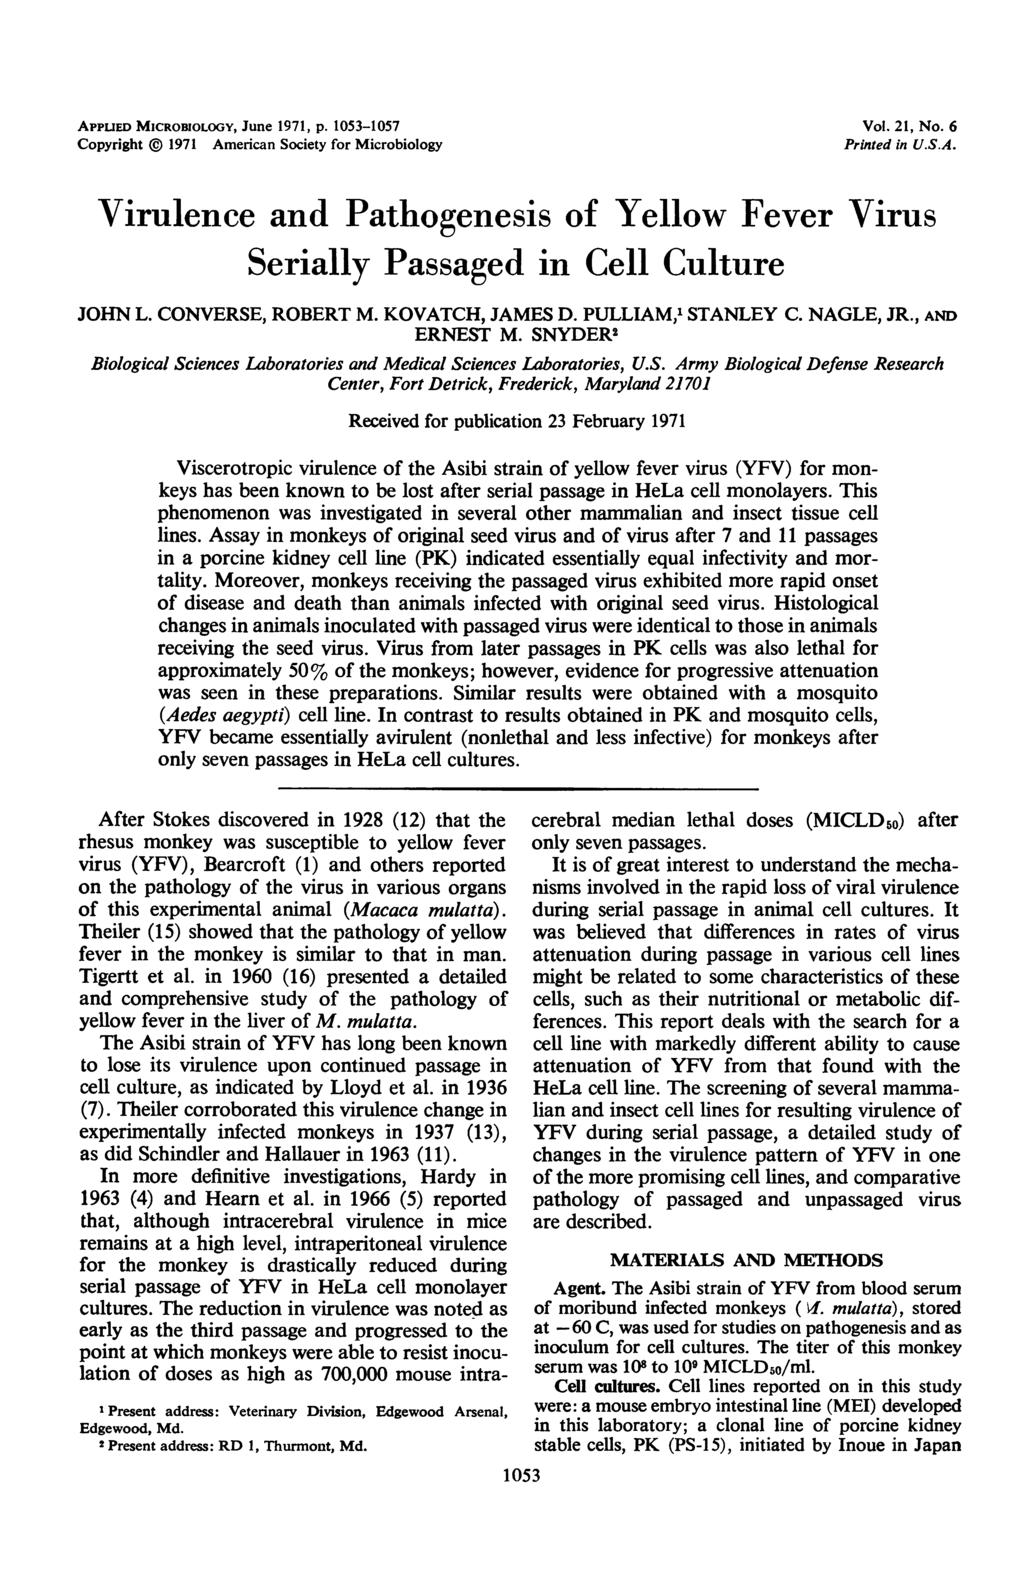 APPUED MICROBIOLOGY, June 1971, p. 1053-1057 Copyright @ 1971 American Society for Microbiology Vol. 21, No. 6 Printed in U.S.A. Virulence and Pathogenesis of Yellow Fever Virus Serially Passaged in Cell Culture JOHN L.